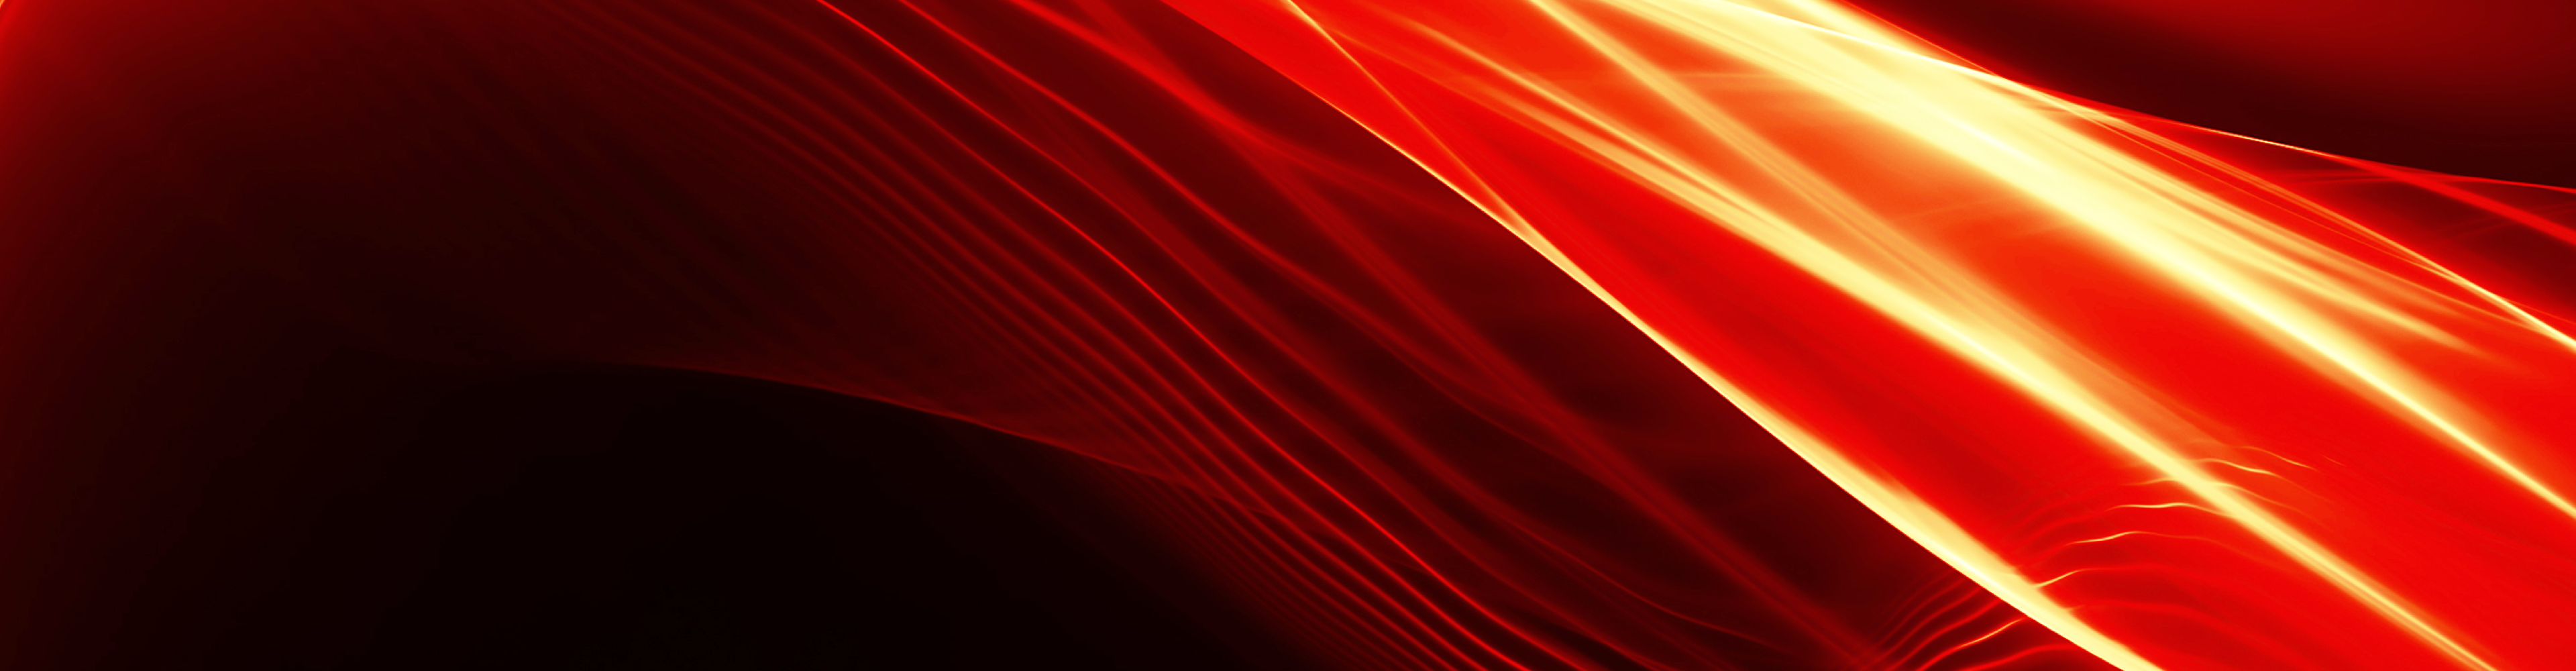 Background image of red lights on a black background